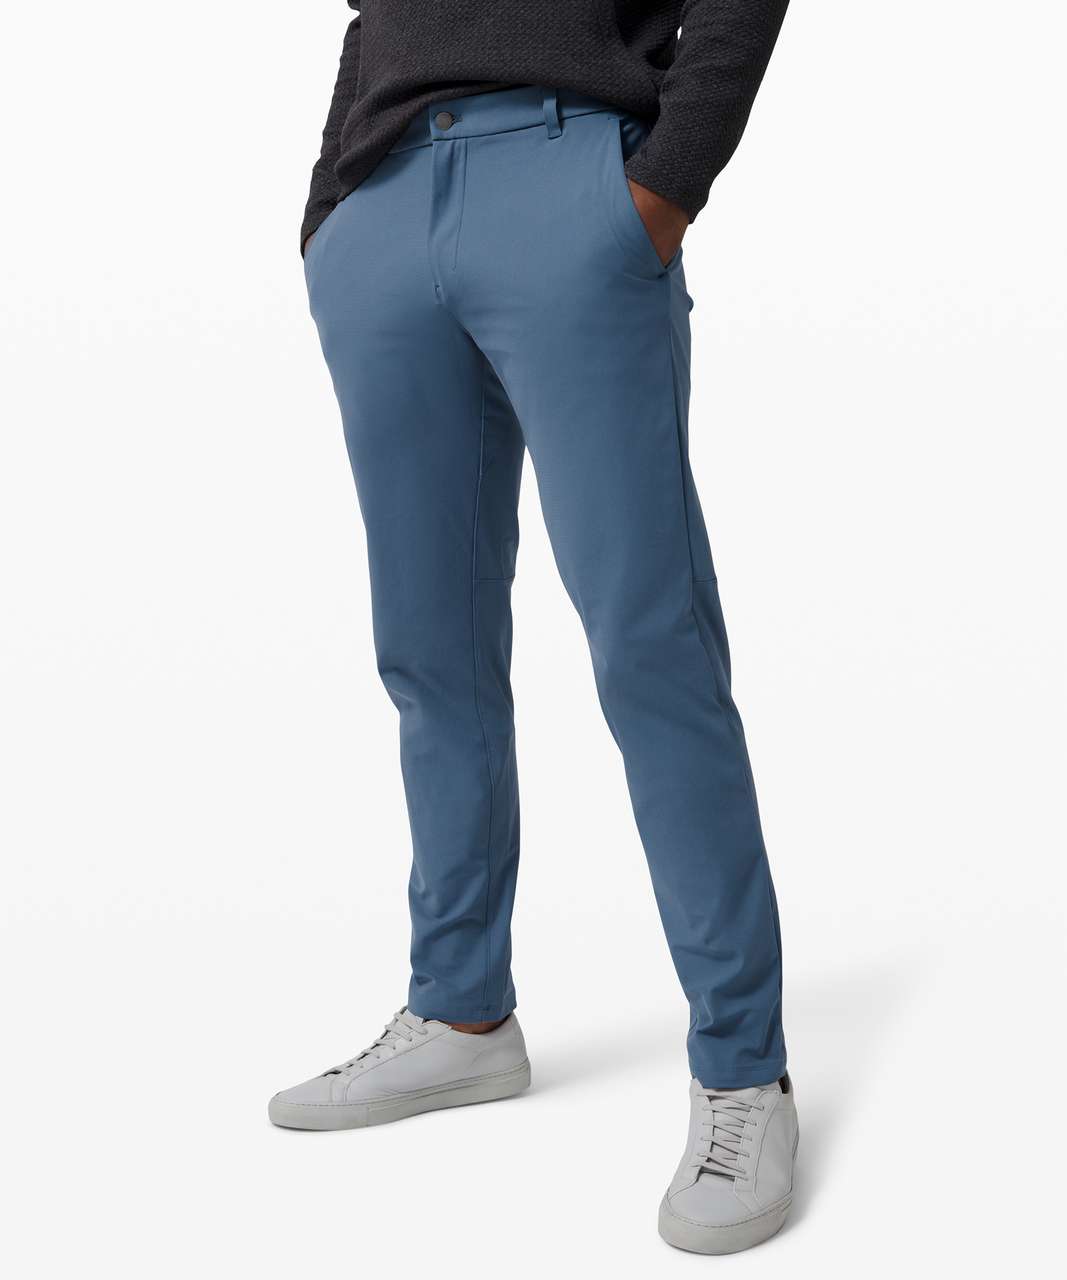 Lululemon ABC Jogger Pant Navy Men New with Tags $128.00 32-34'' Inseam